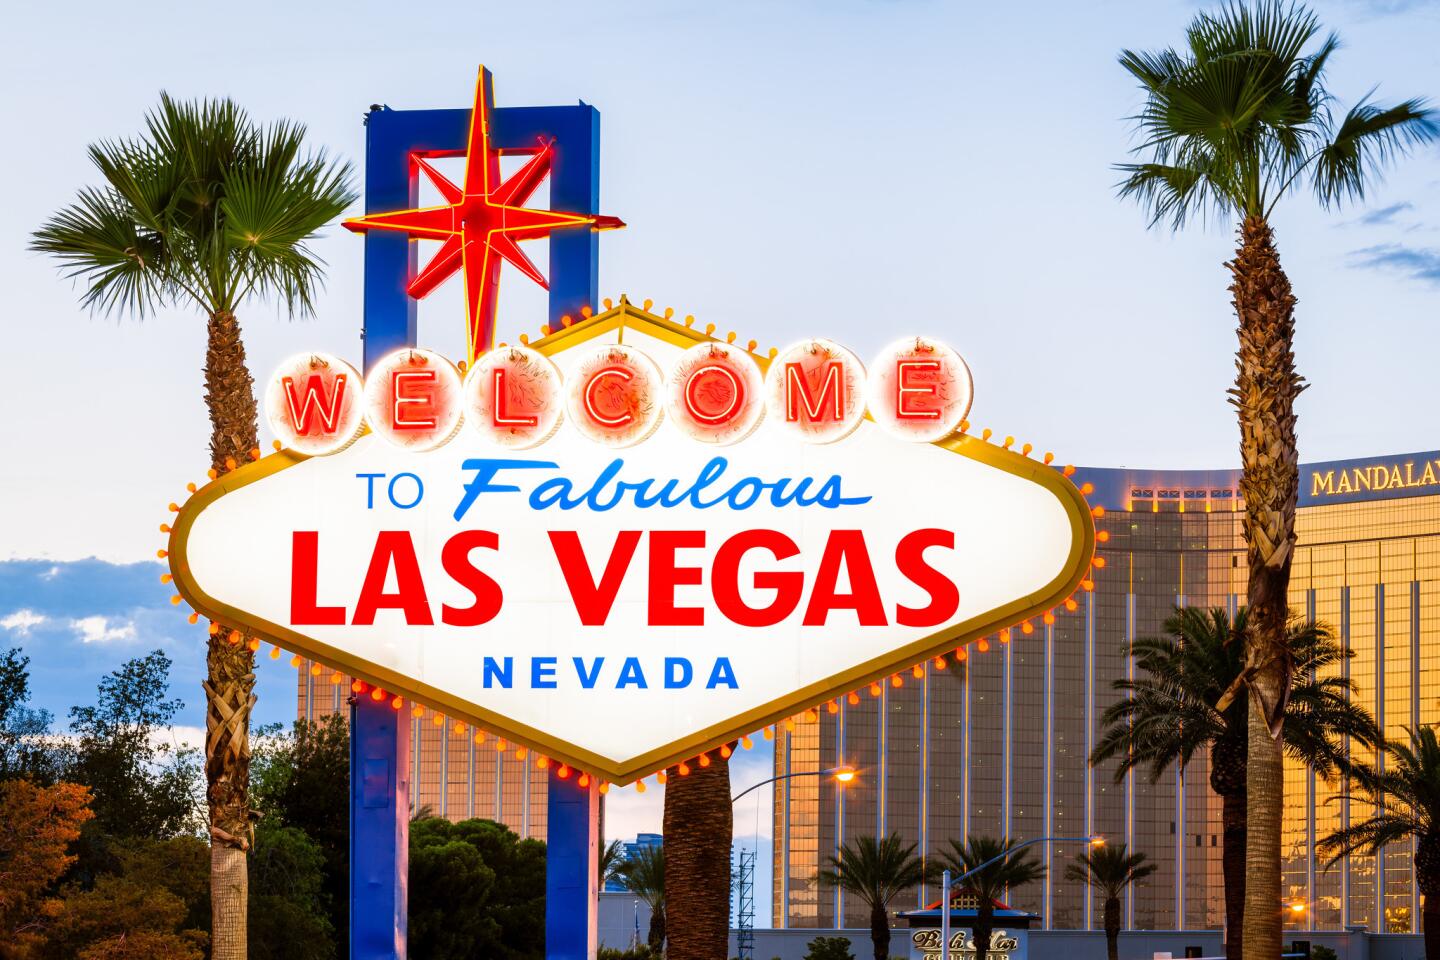 As the city's website puts it, if you don’t visit the "Welcome to Fabulous Las Vegas" sign, did you even go to Vegas? Built in 1959, it stands about 25 feet tall.